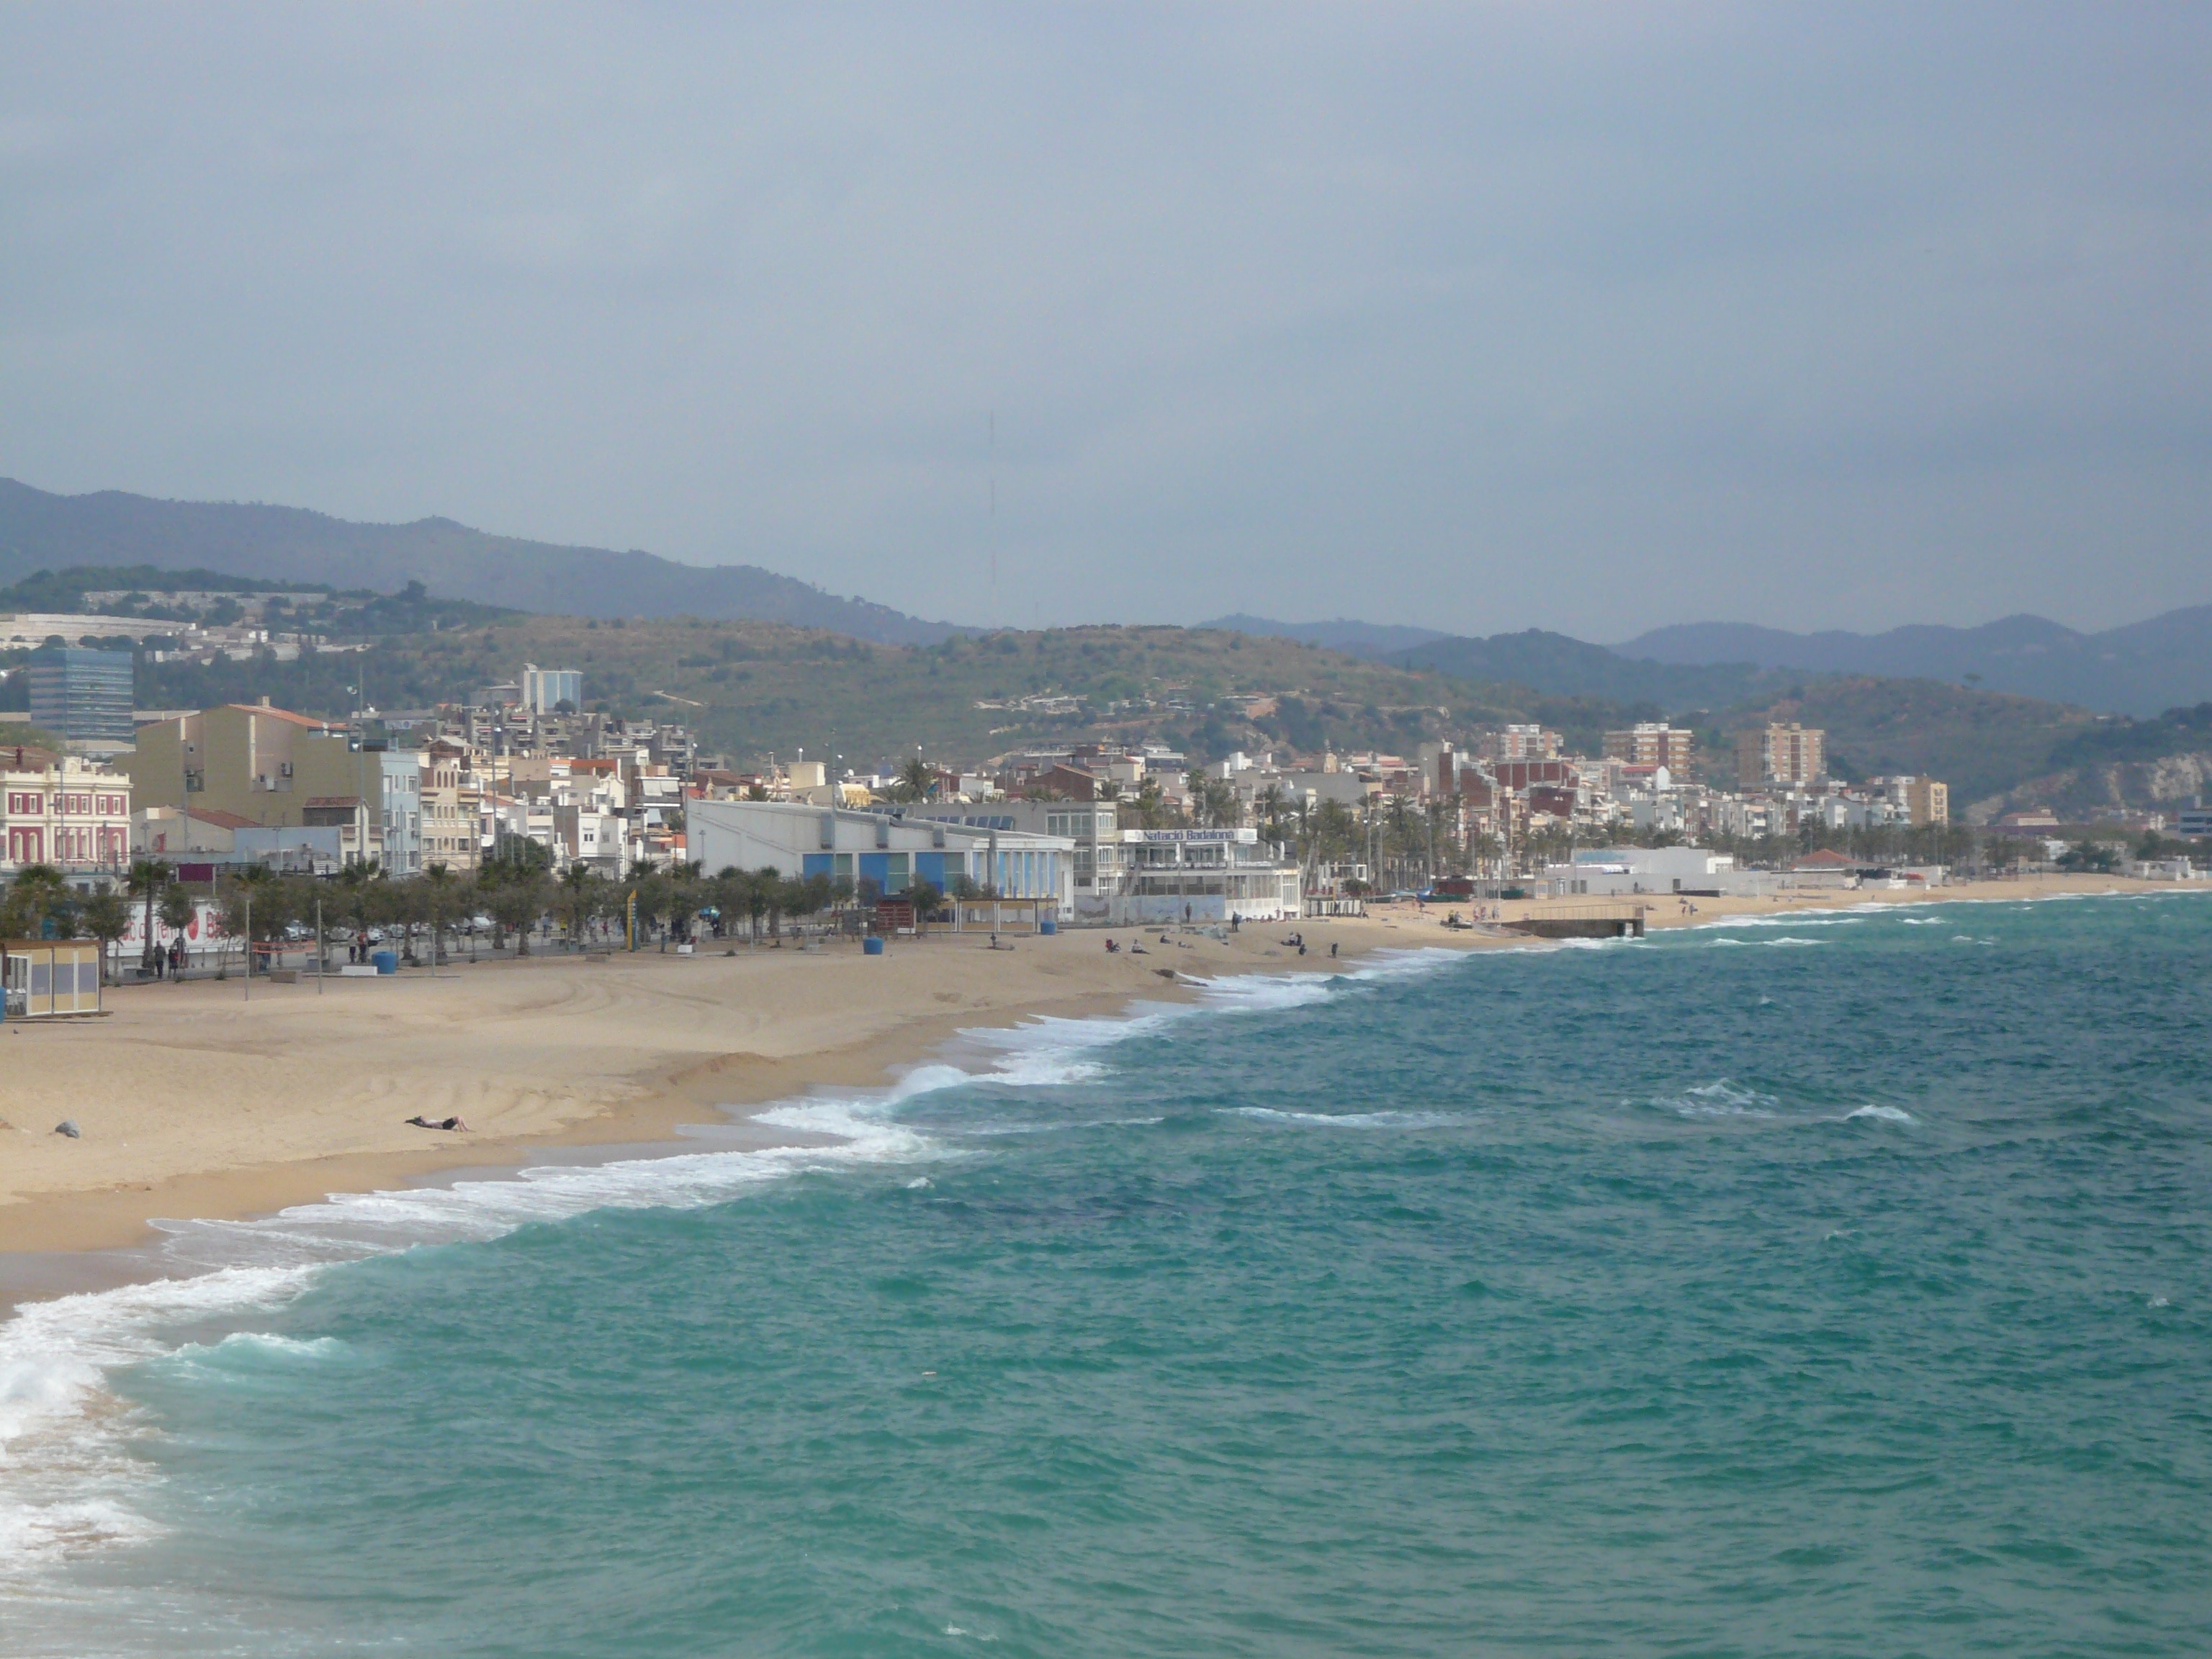 This is a a photo of a beach in Catalonia, Spain, with id: